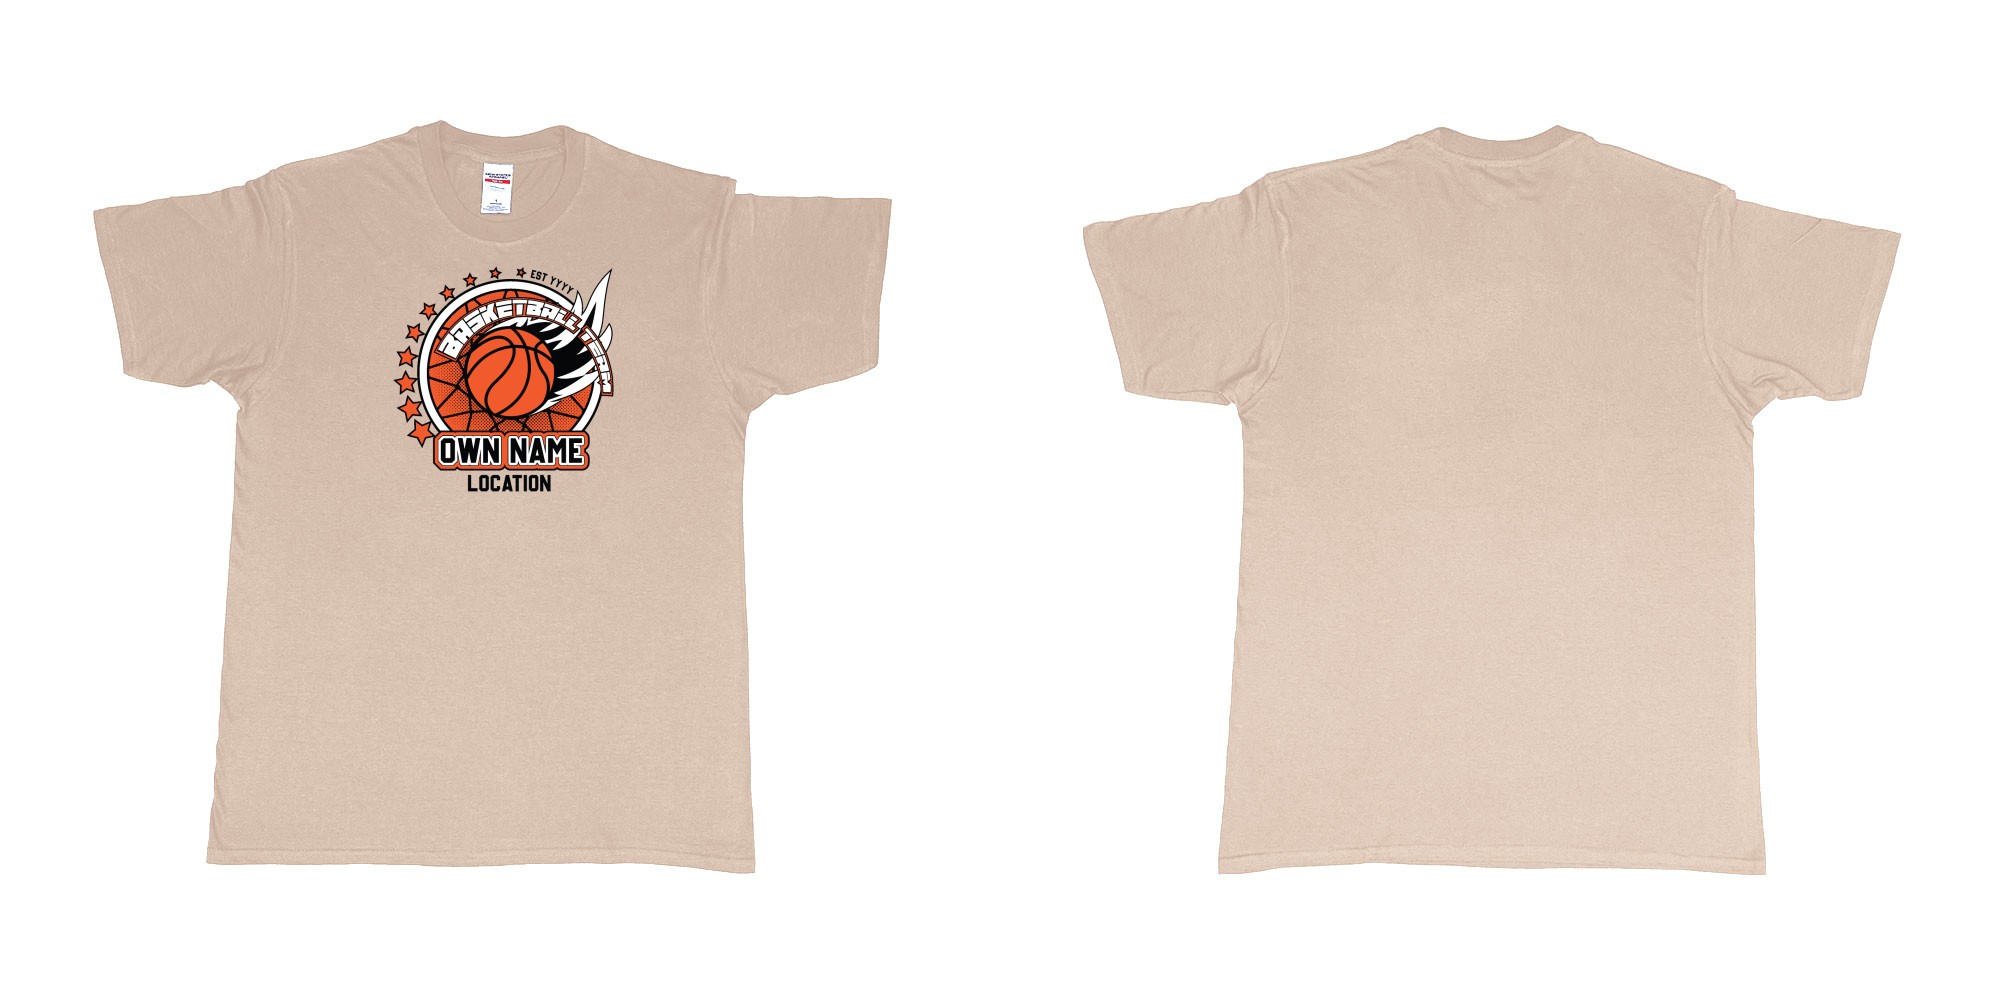 Custom tshirt design basketball team own name location established year custom design production bali in fabric color sand choice your own text made in Bali by The Pirate Way